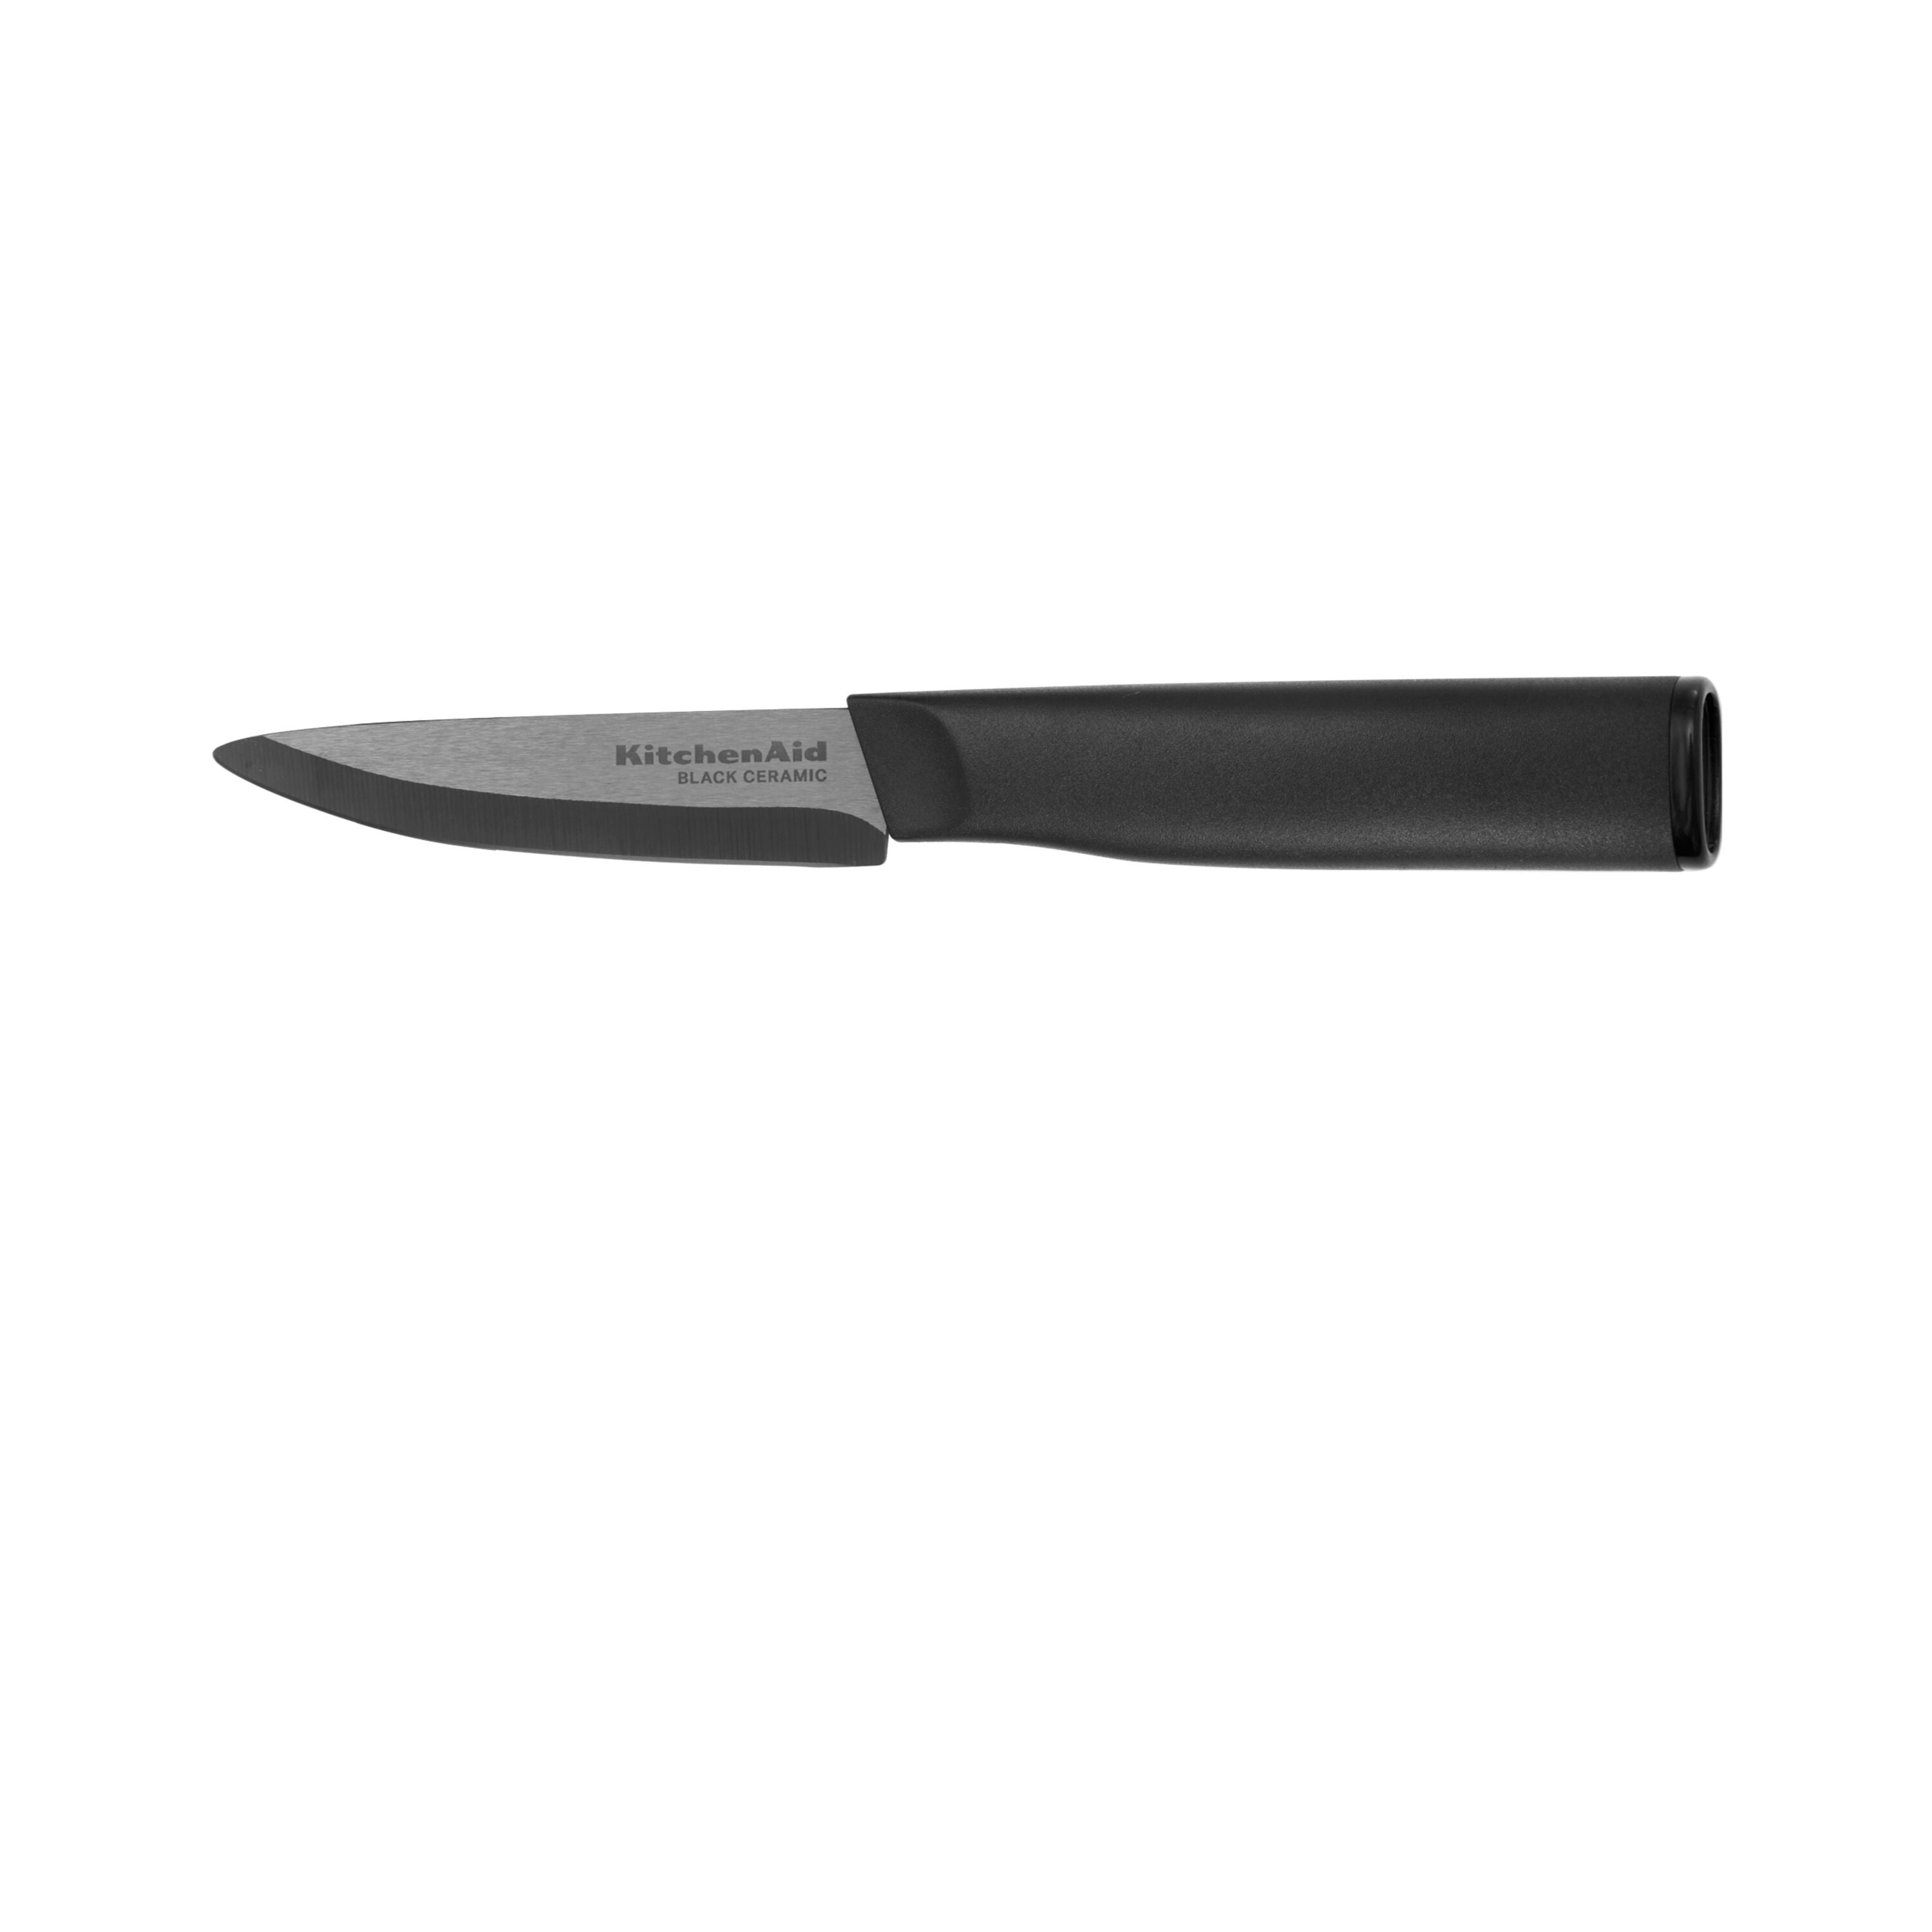 KitchenAid Classic Paring Knife with Endcap and Custom-Fit Blade Cover,  3.5-inch, Sharp Kitchen Knife, High-Carbon Japanese Stainless Steel Blade